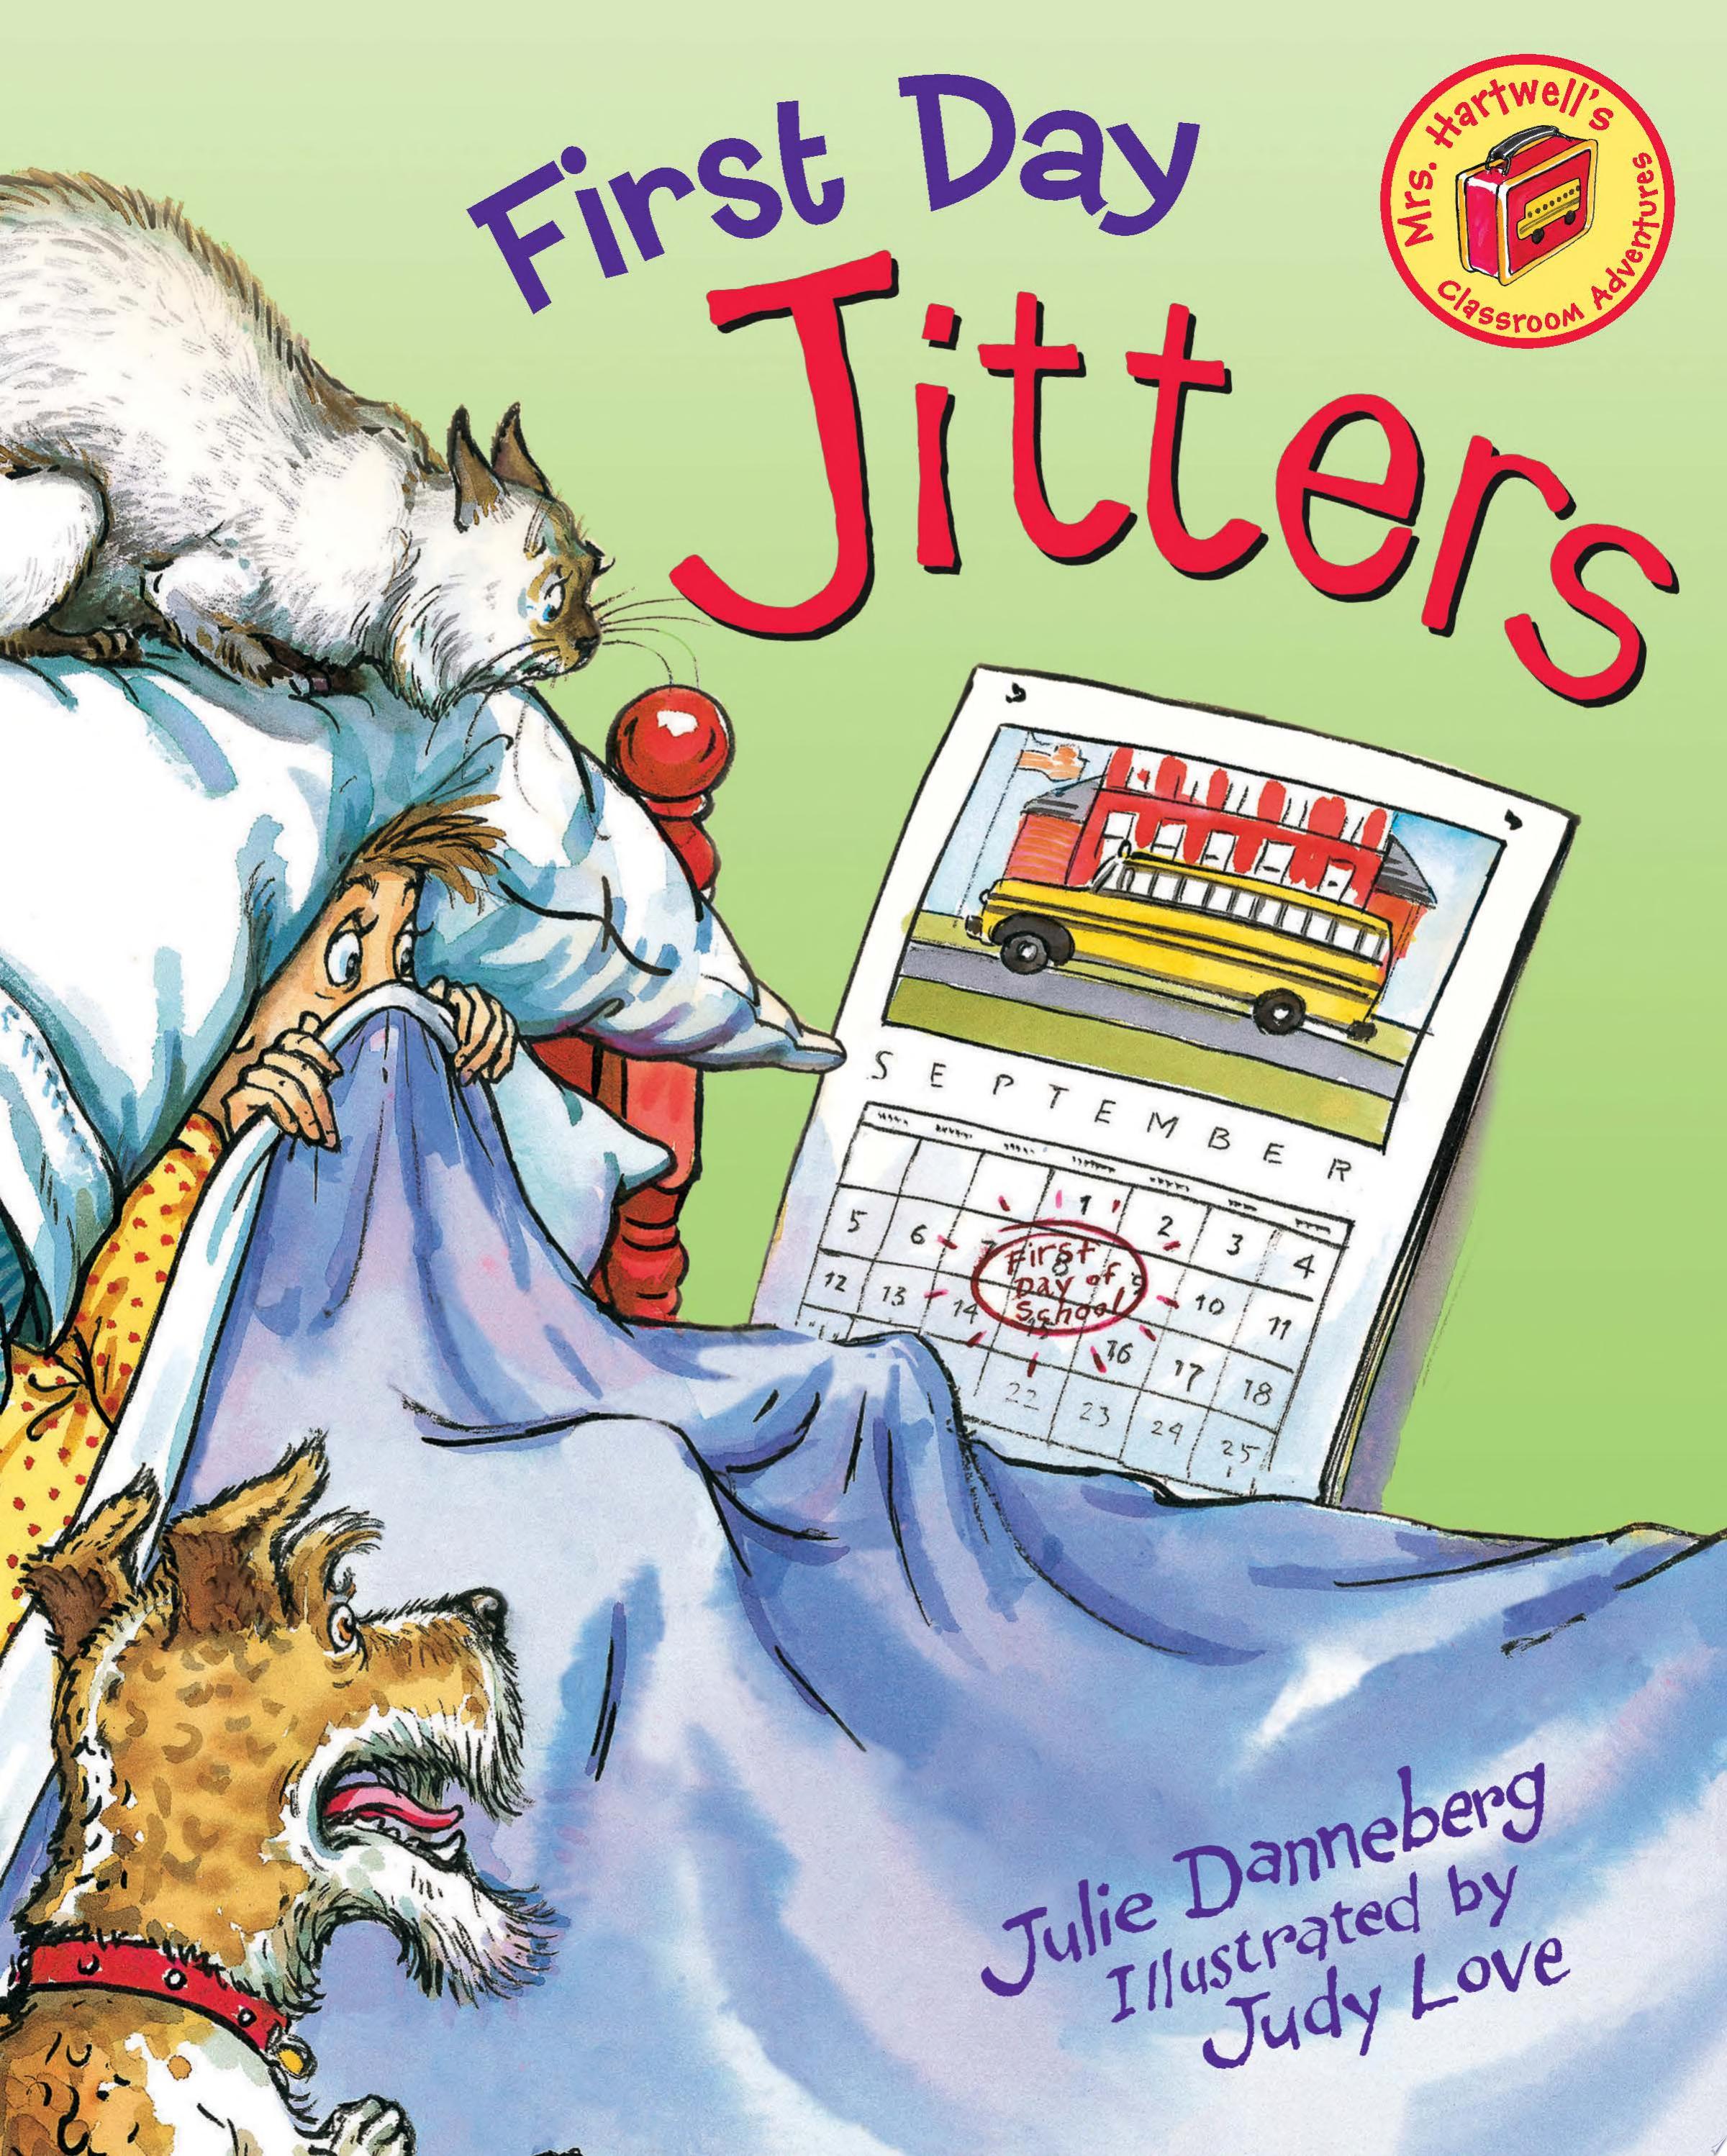 Image for "First Day Jitters"